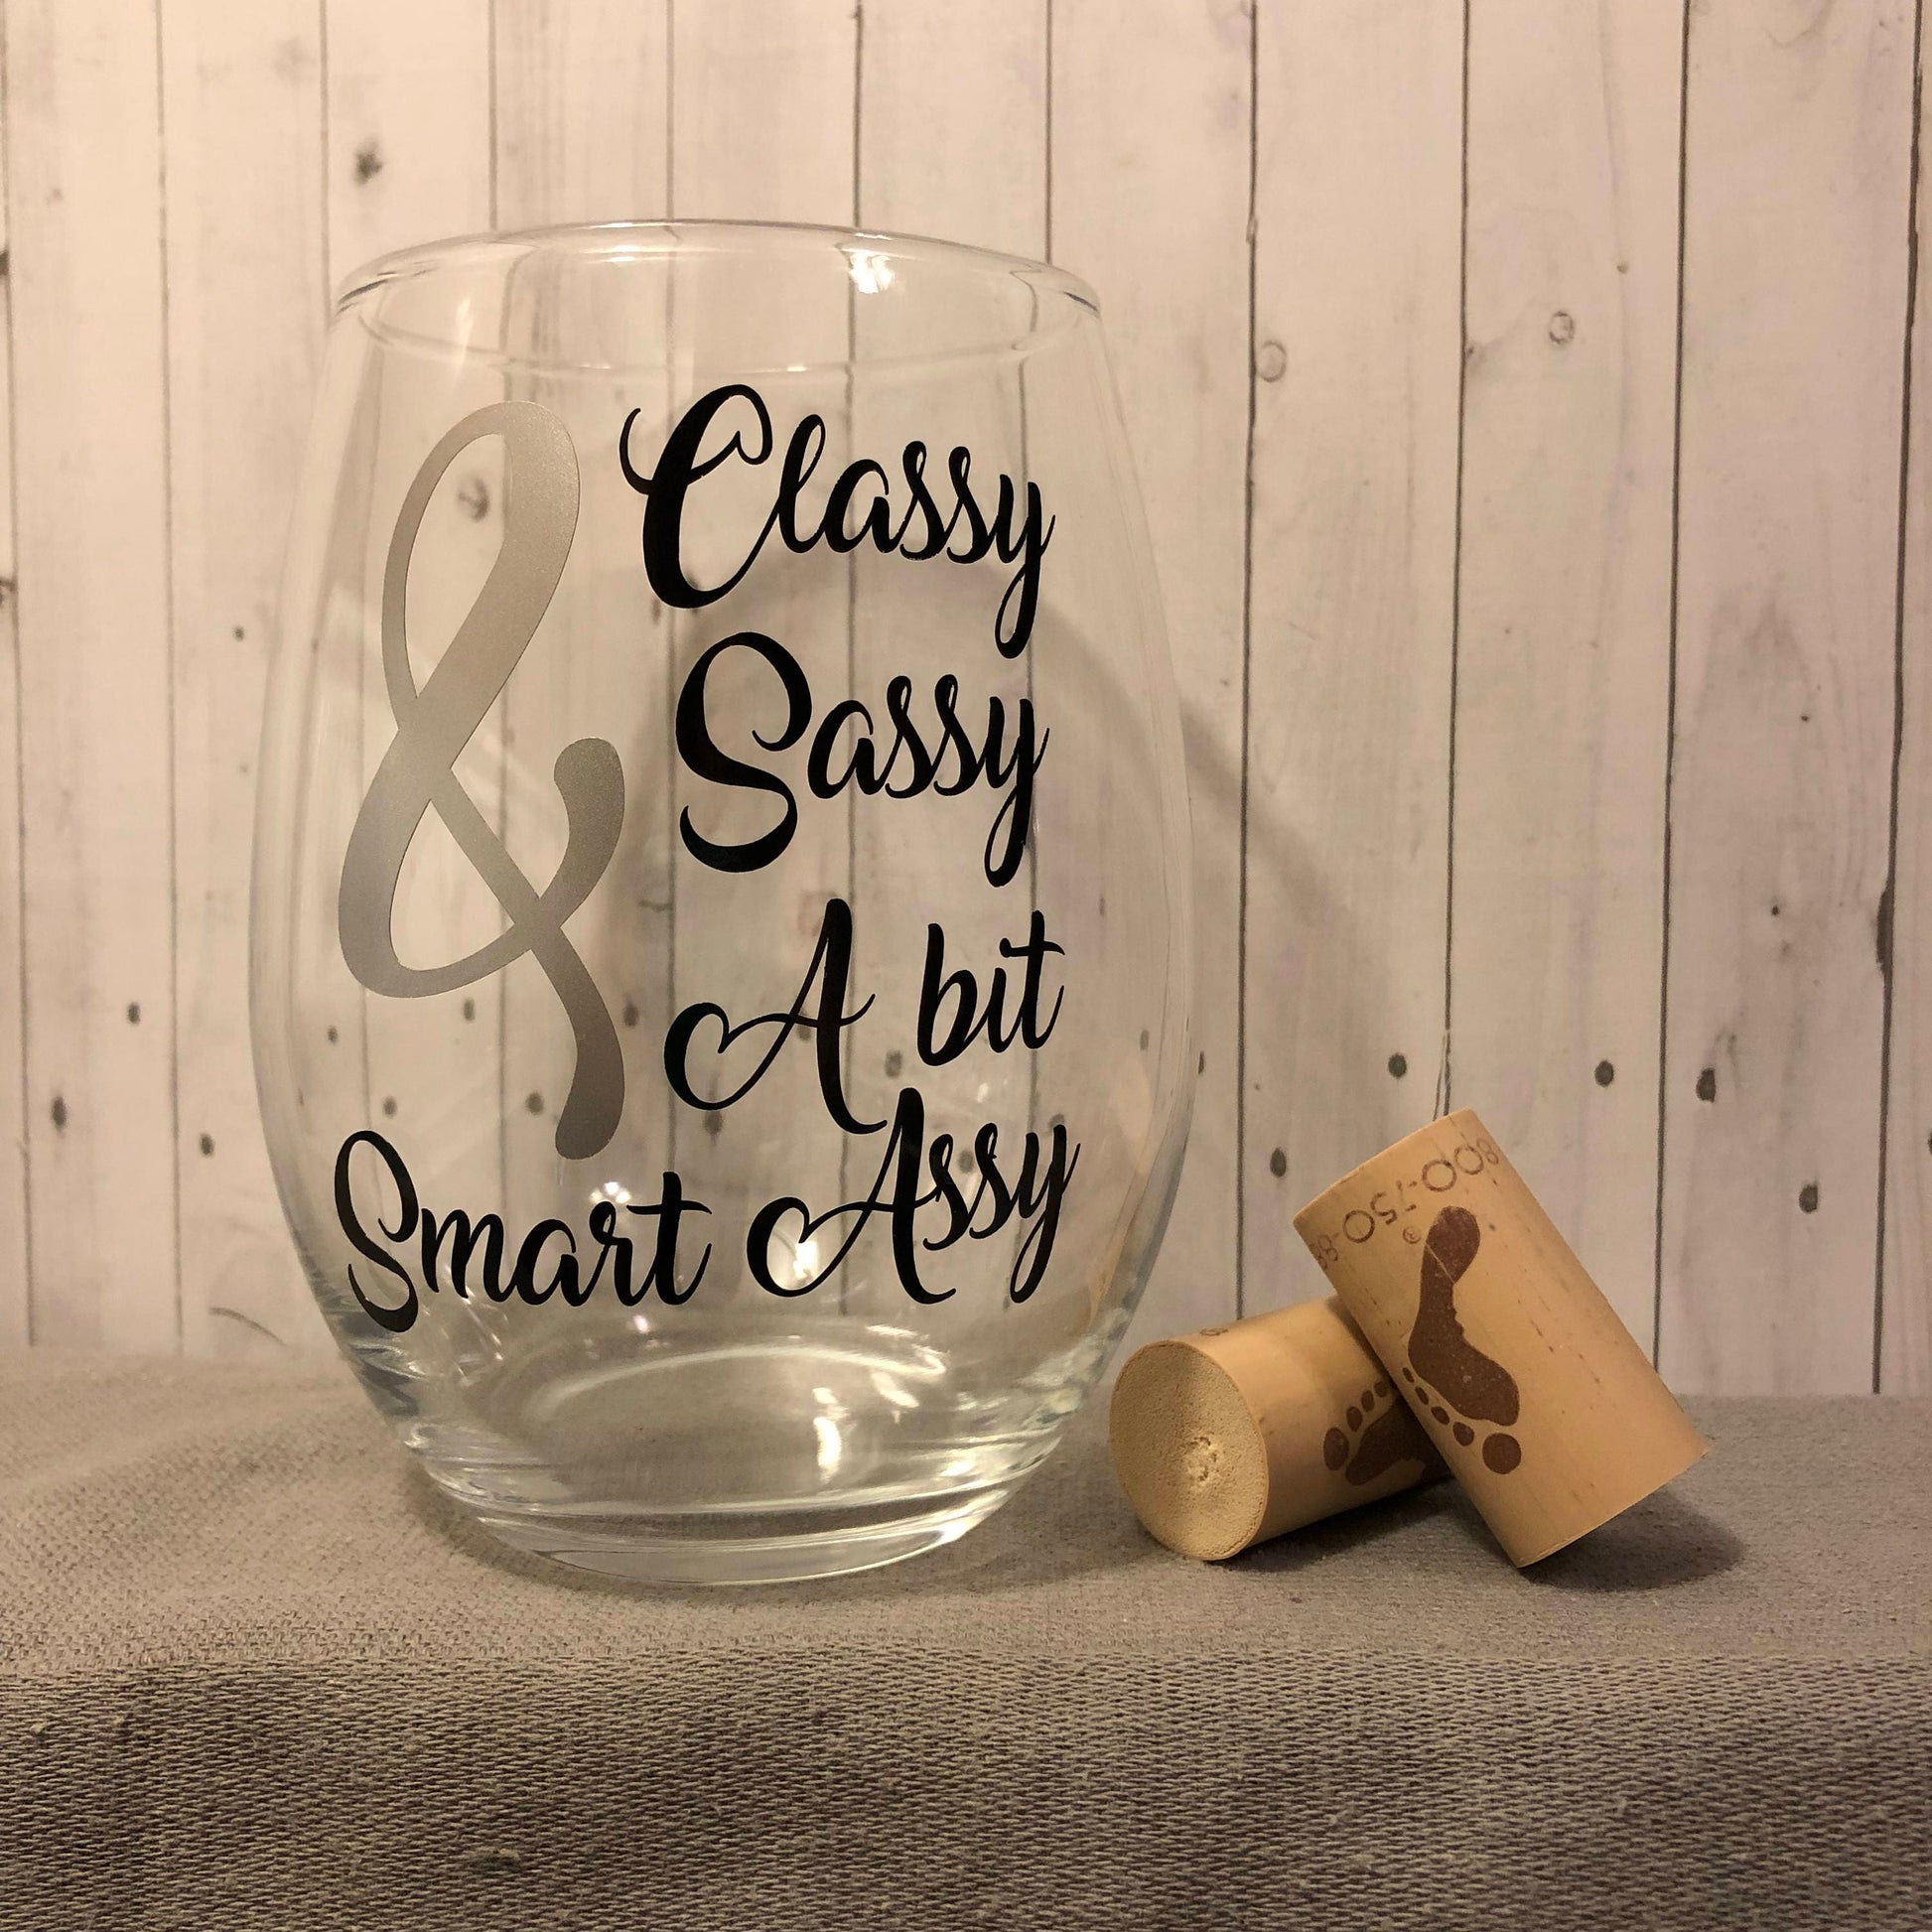 Classy Sassy & a bit smart assy glass, birthday gifts for her, gifts f –  K.C.'s Creations Station